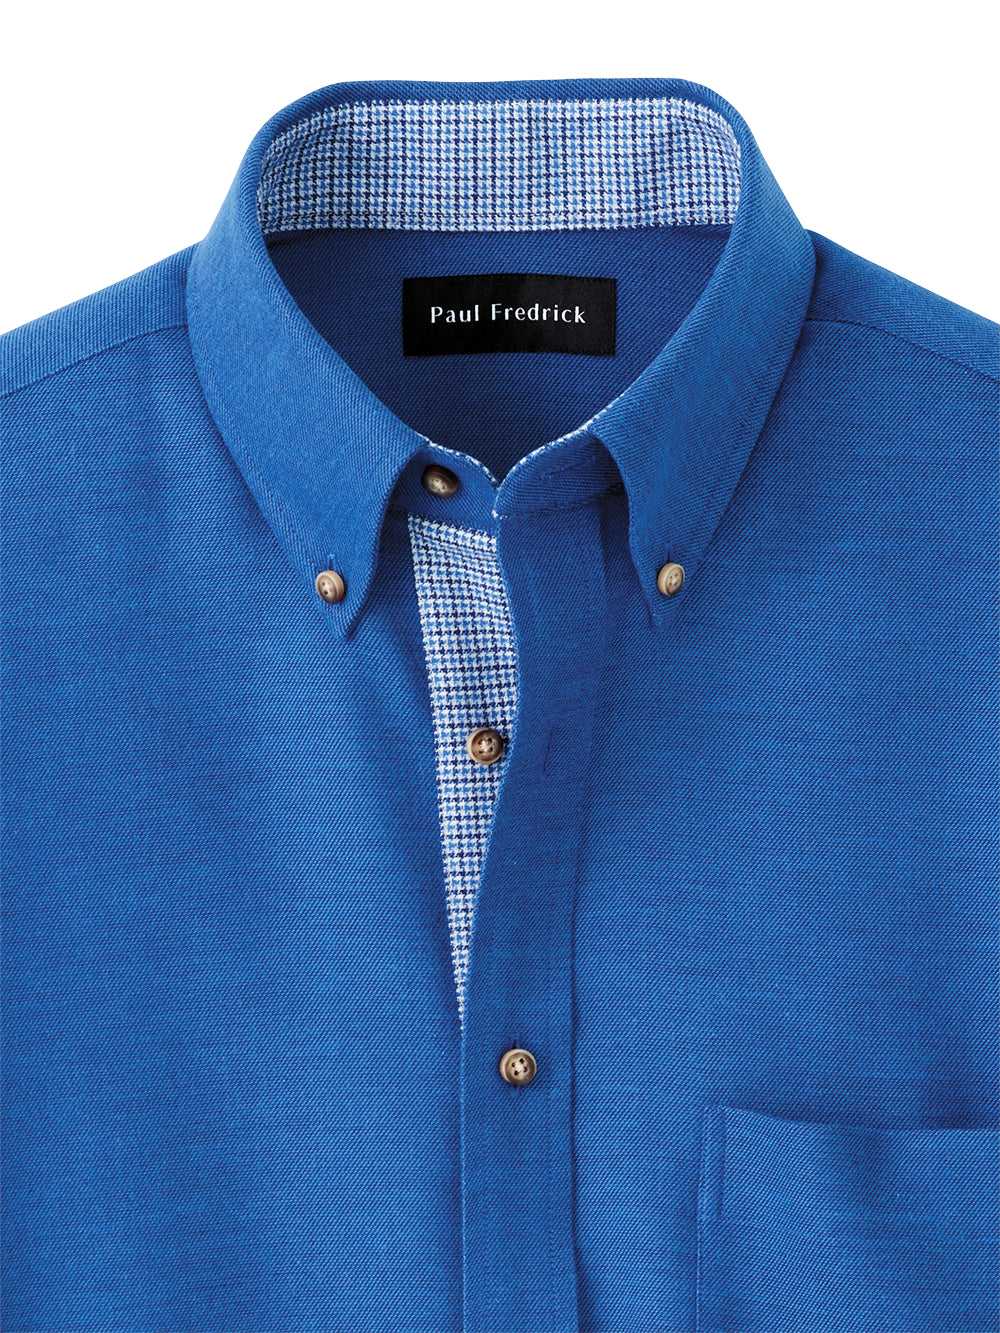 Paul Fredrick, Brushed Twill Solid Casual Shirt With Contrast Trim